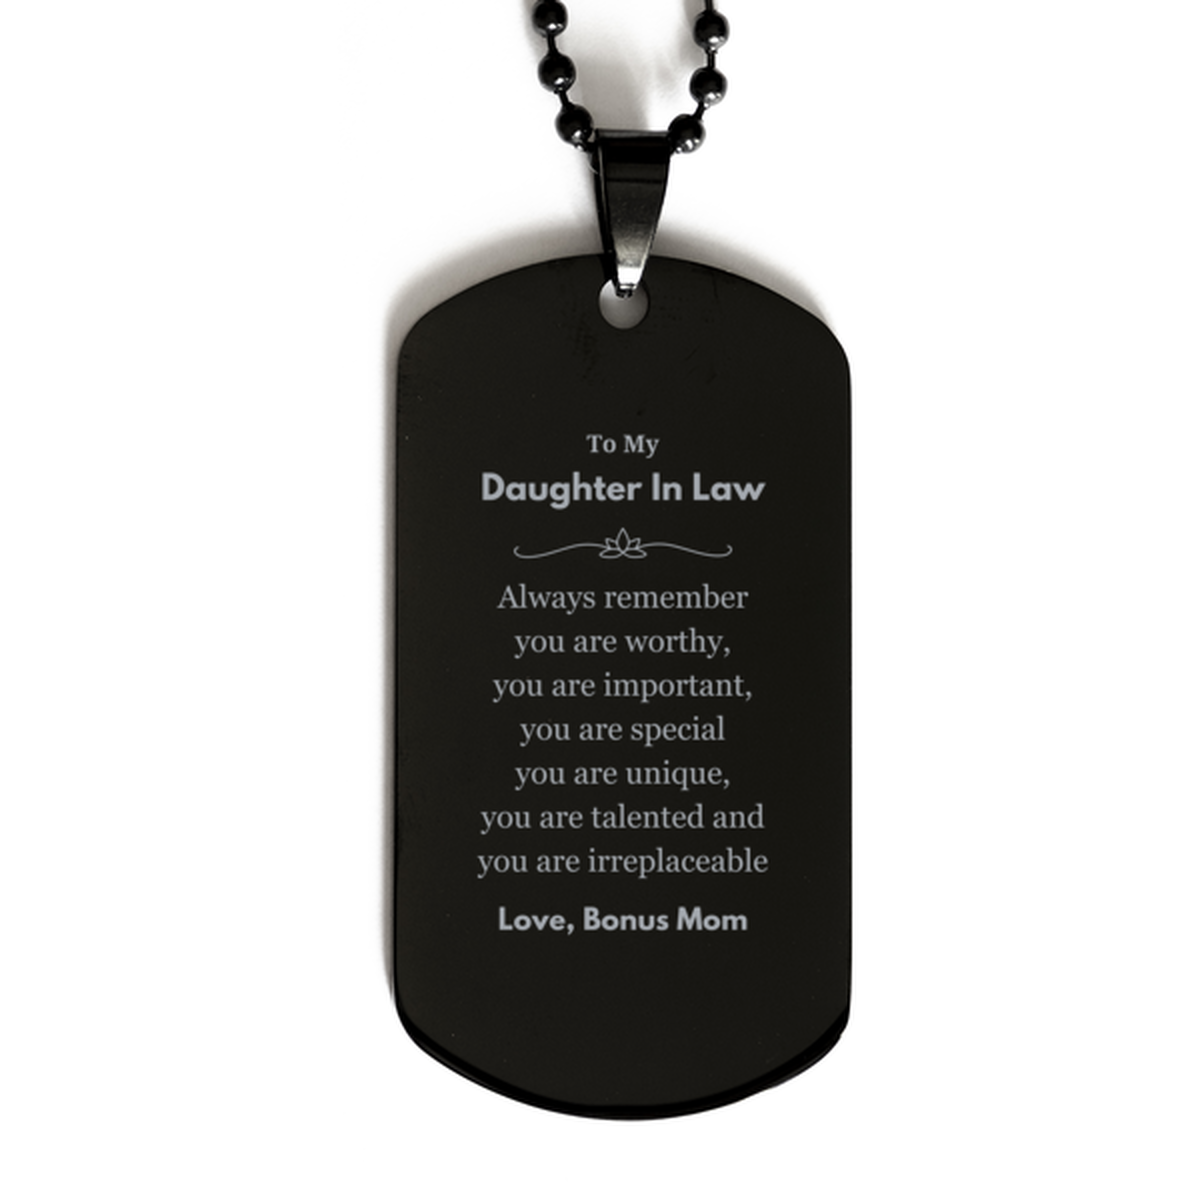 Daughter In Law Birthday Gifts from Bonus Mom, Inspirational Black Dog Tag for Daughter In Law Christmas Graduation Gifts for Daughter In Law Always remember you are worthy, you are important. Love, Bonus Mom